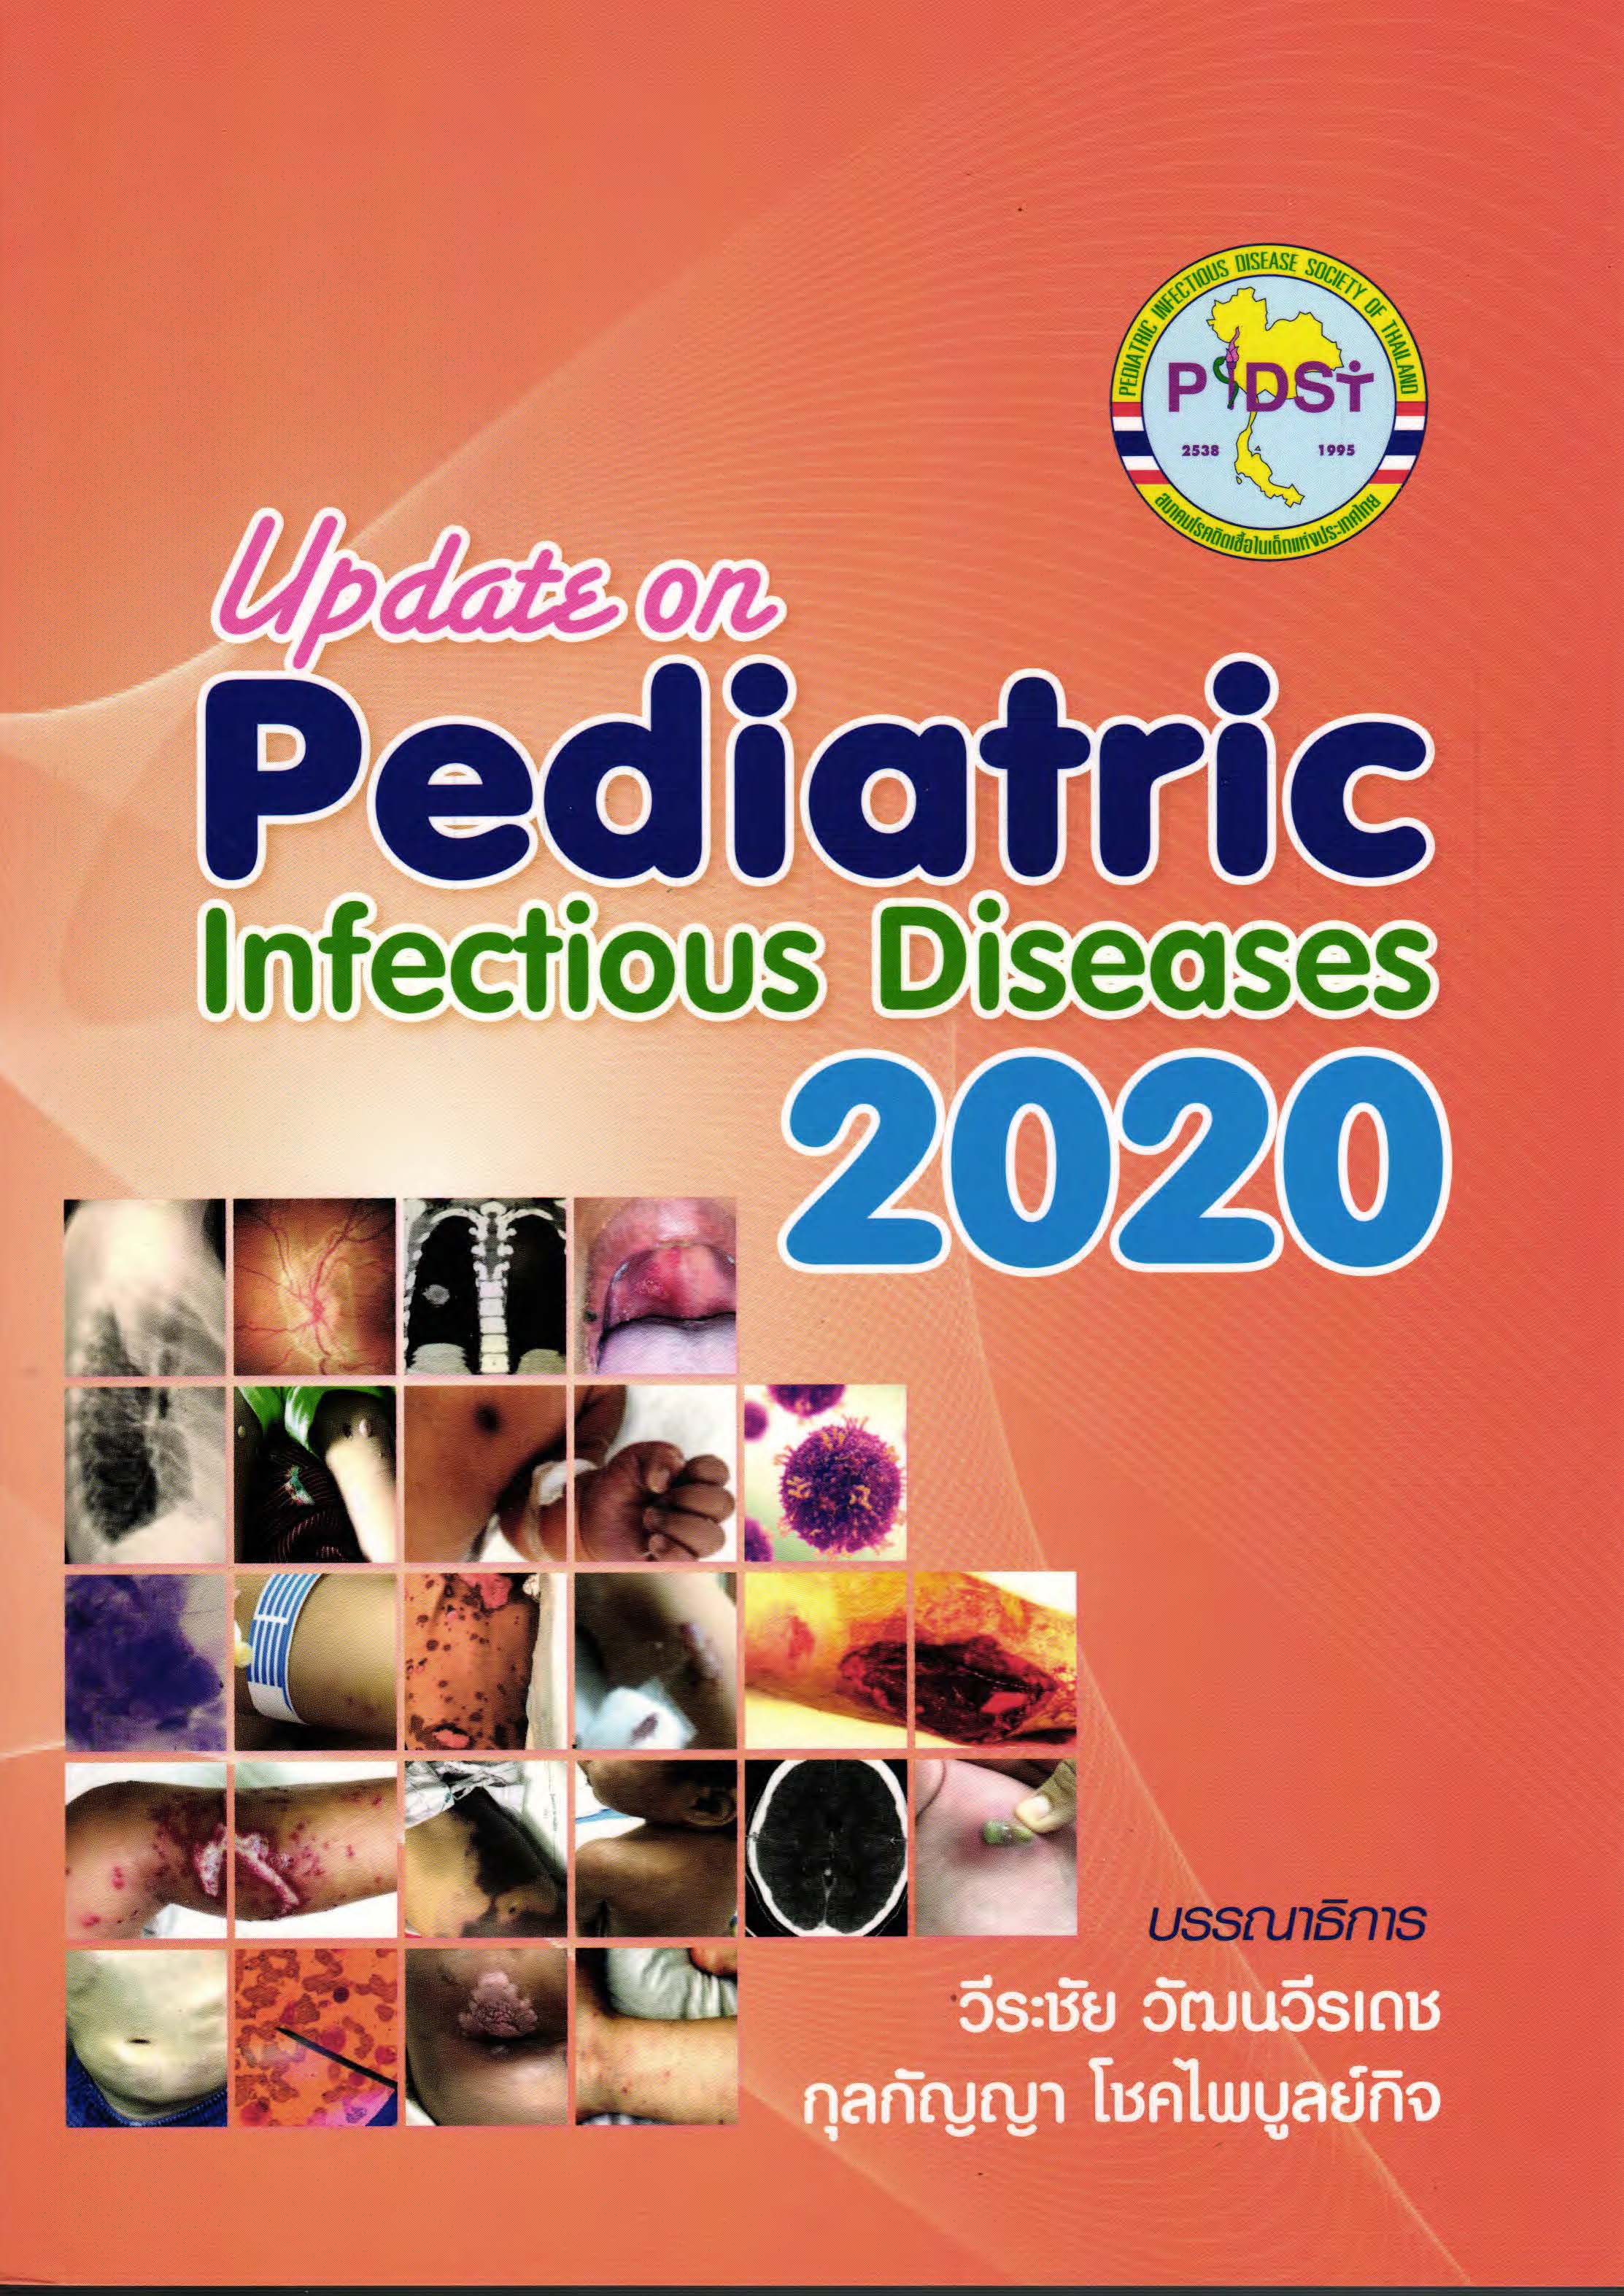 Update on pediatric infectious diseases 2020